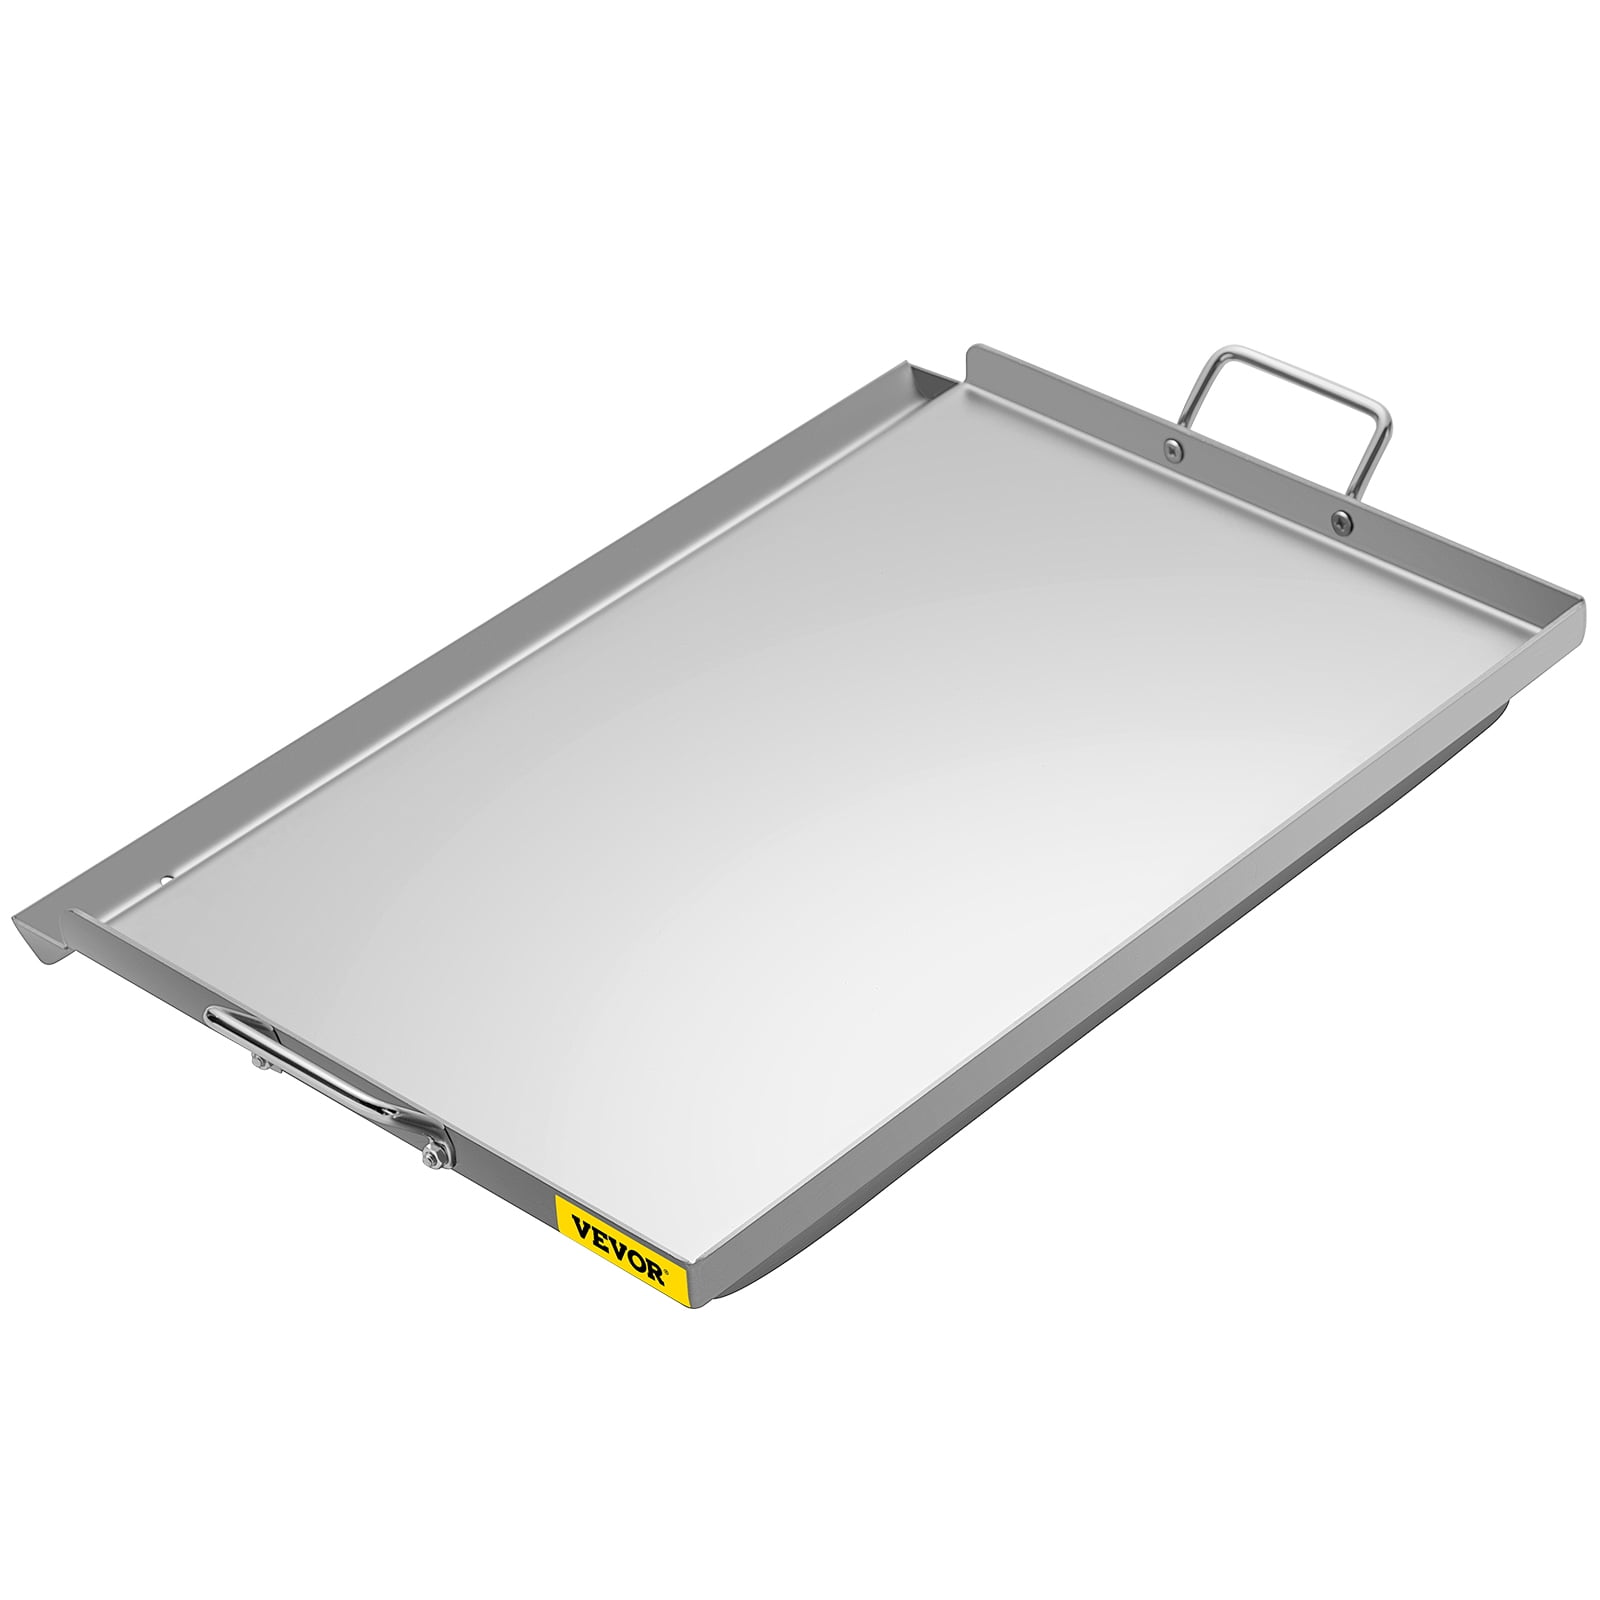 Stainless Steel Griddle 23 in. x 16 in. Griddle Flat Top Plate with Handles  Rectangular Flat Top Grill with Drain Hole